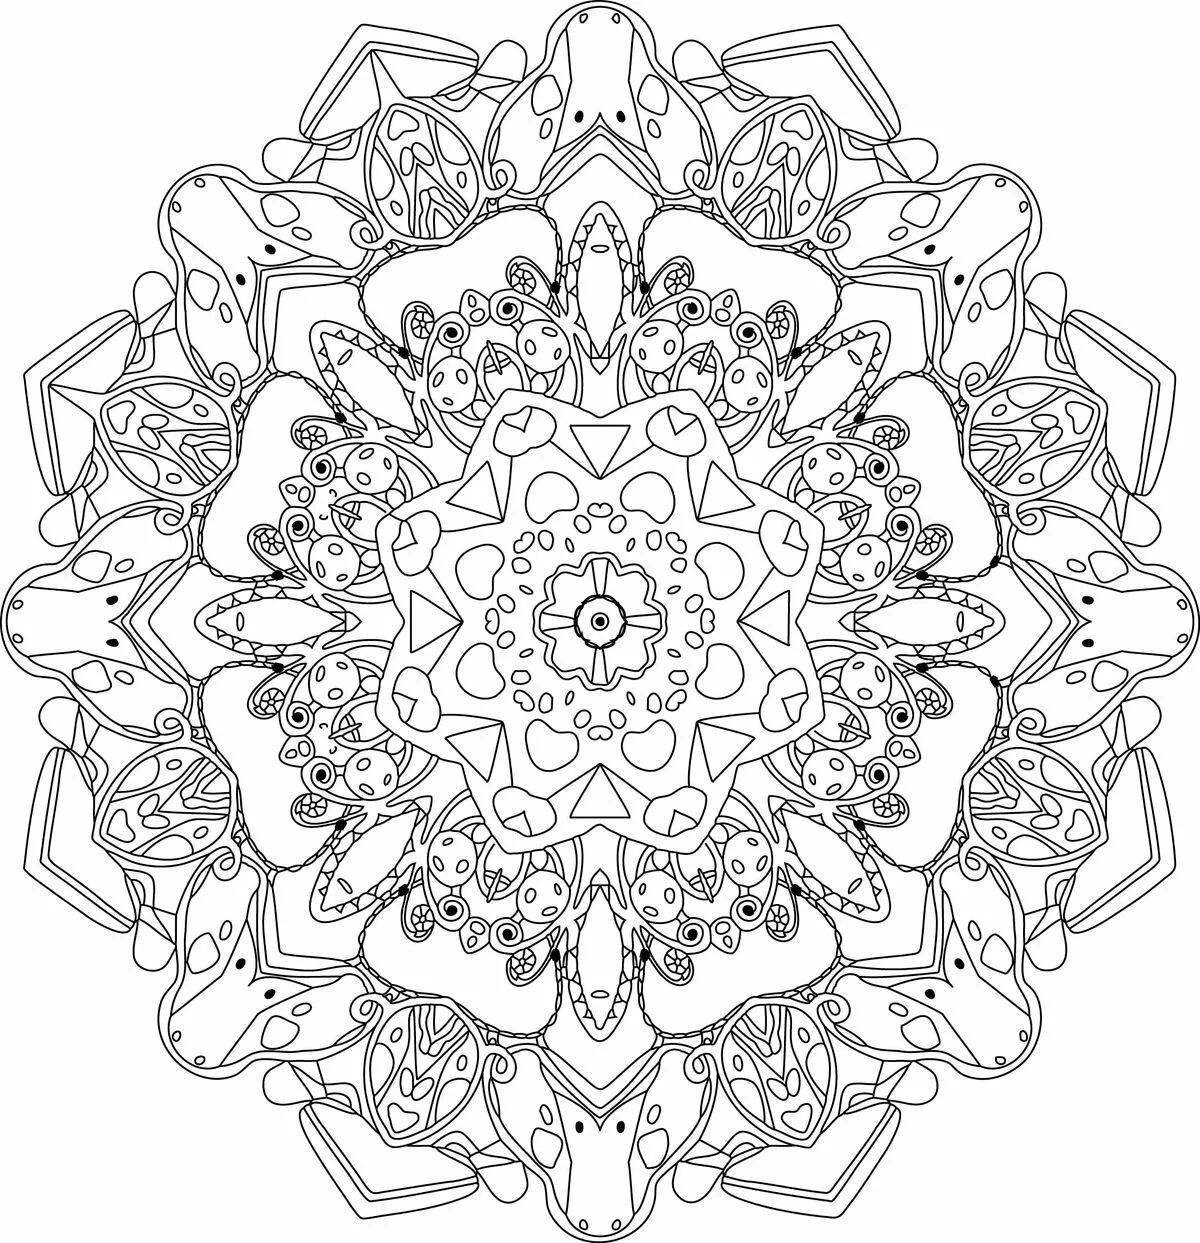 Exquisite stress relief coloring book